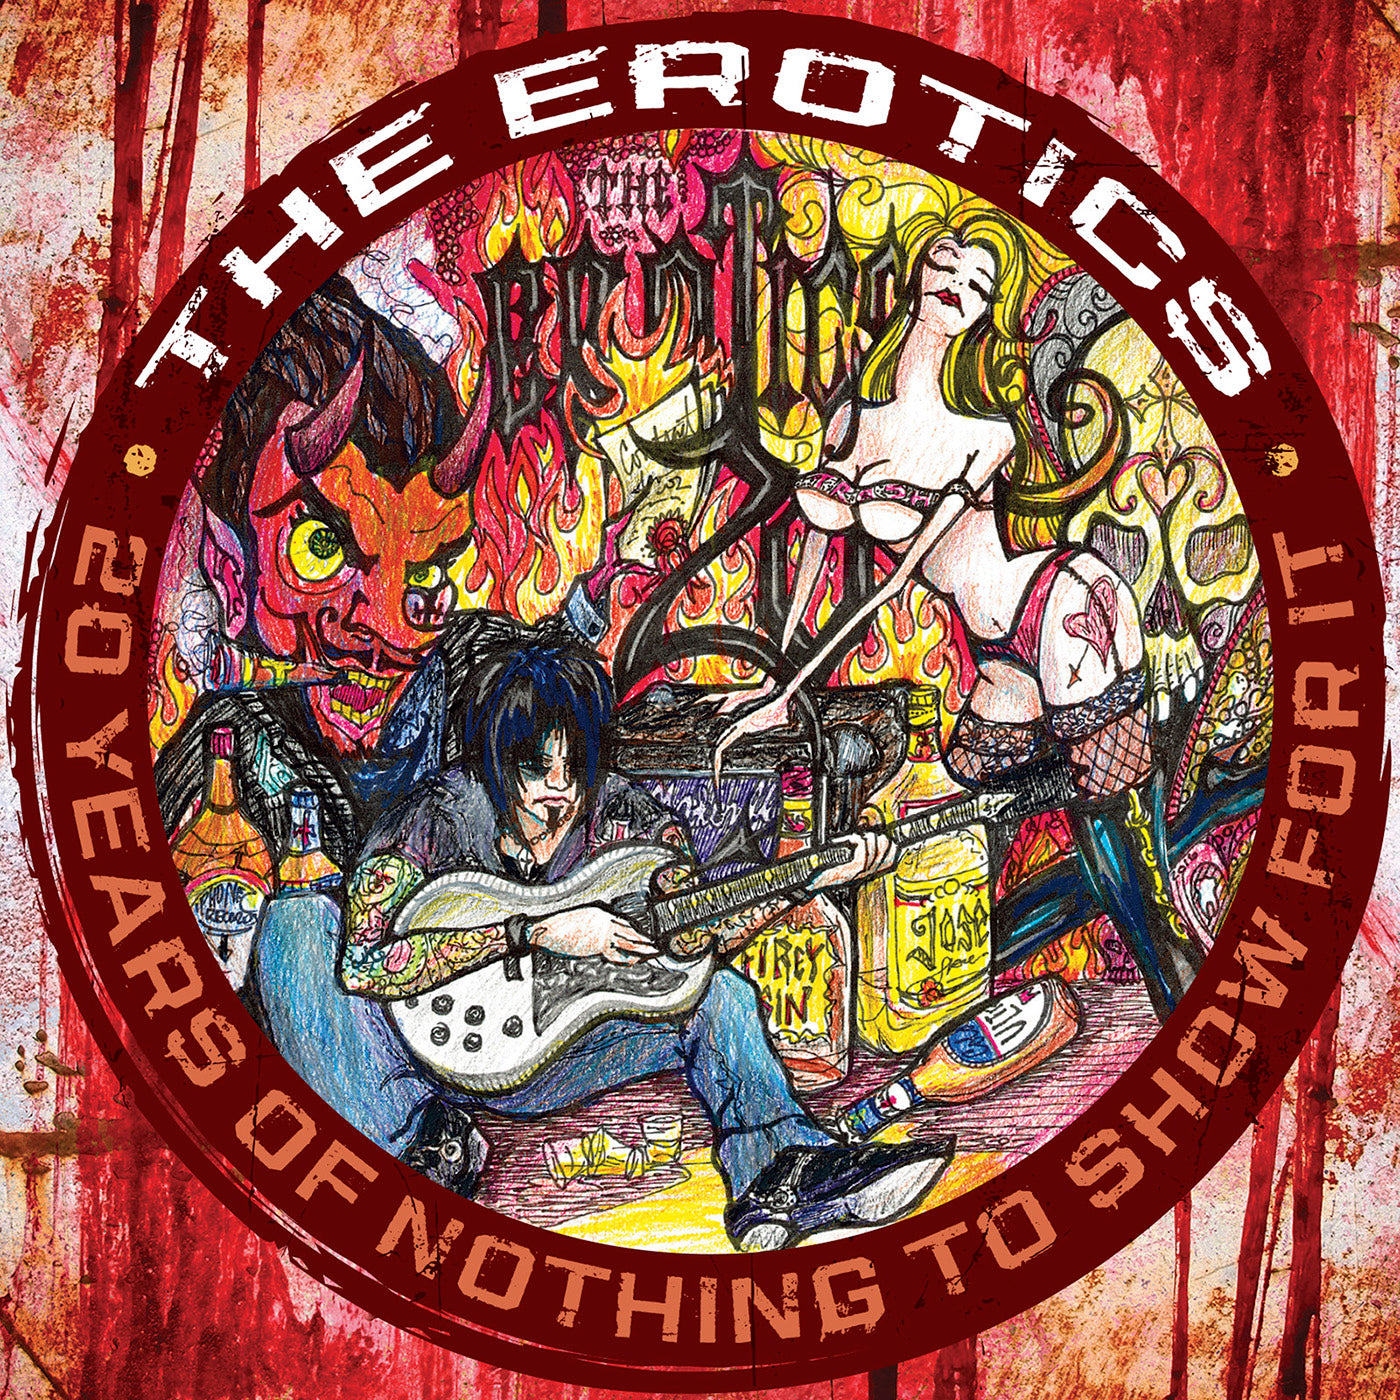 The Erotics - 20 Years of Nothing to Show for It [Best of the Erotics] - 2CD set